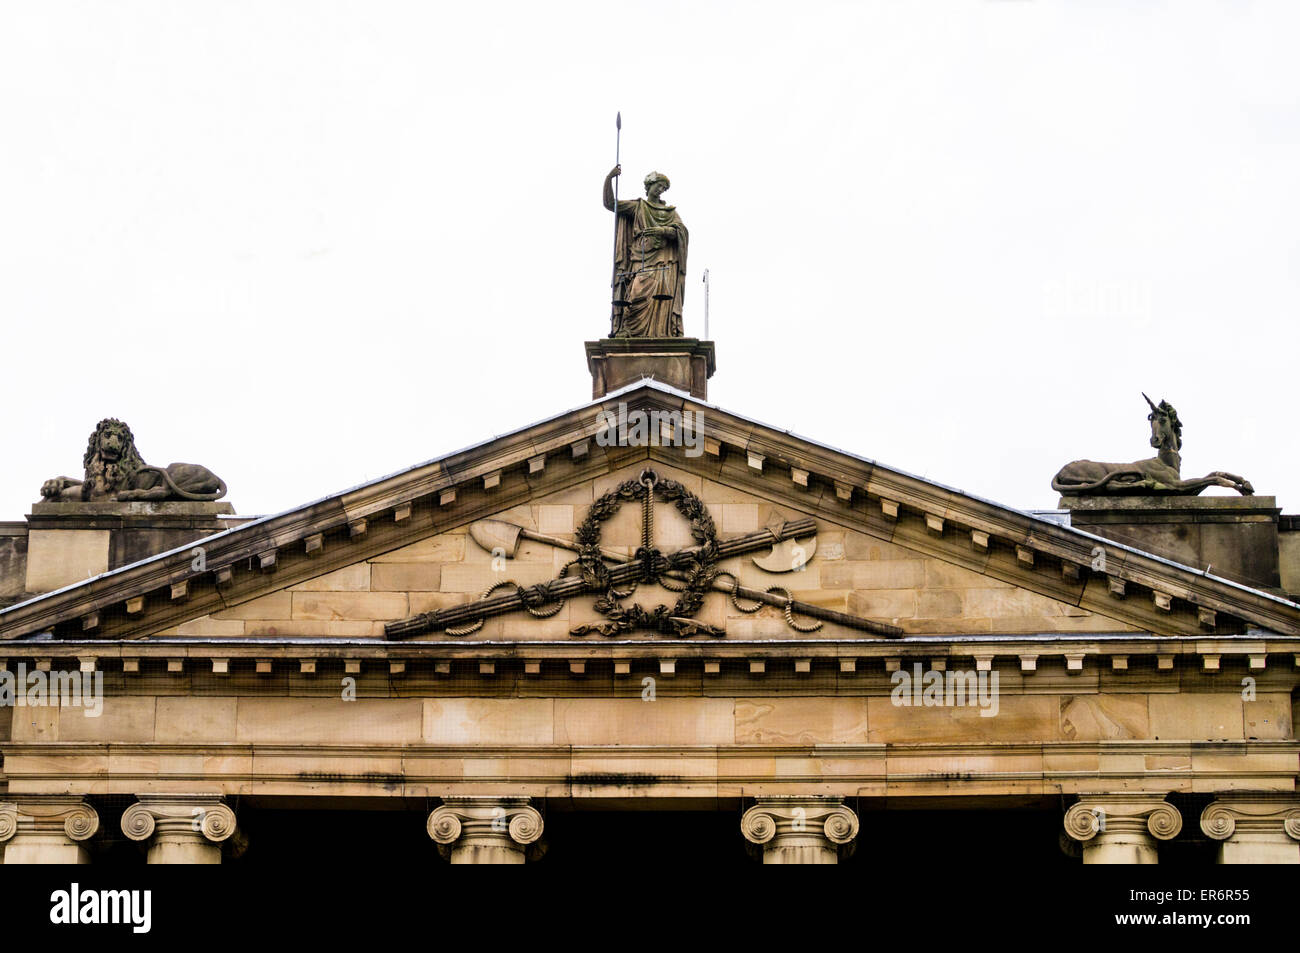 Statues representing justice on the roofline above the entrance to York Crown Court, City of York, England, UK Stock Photo